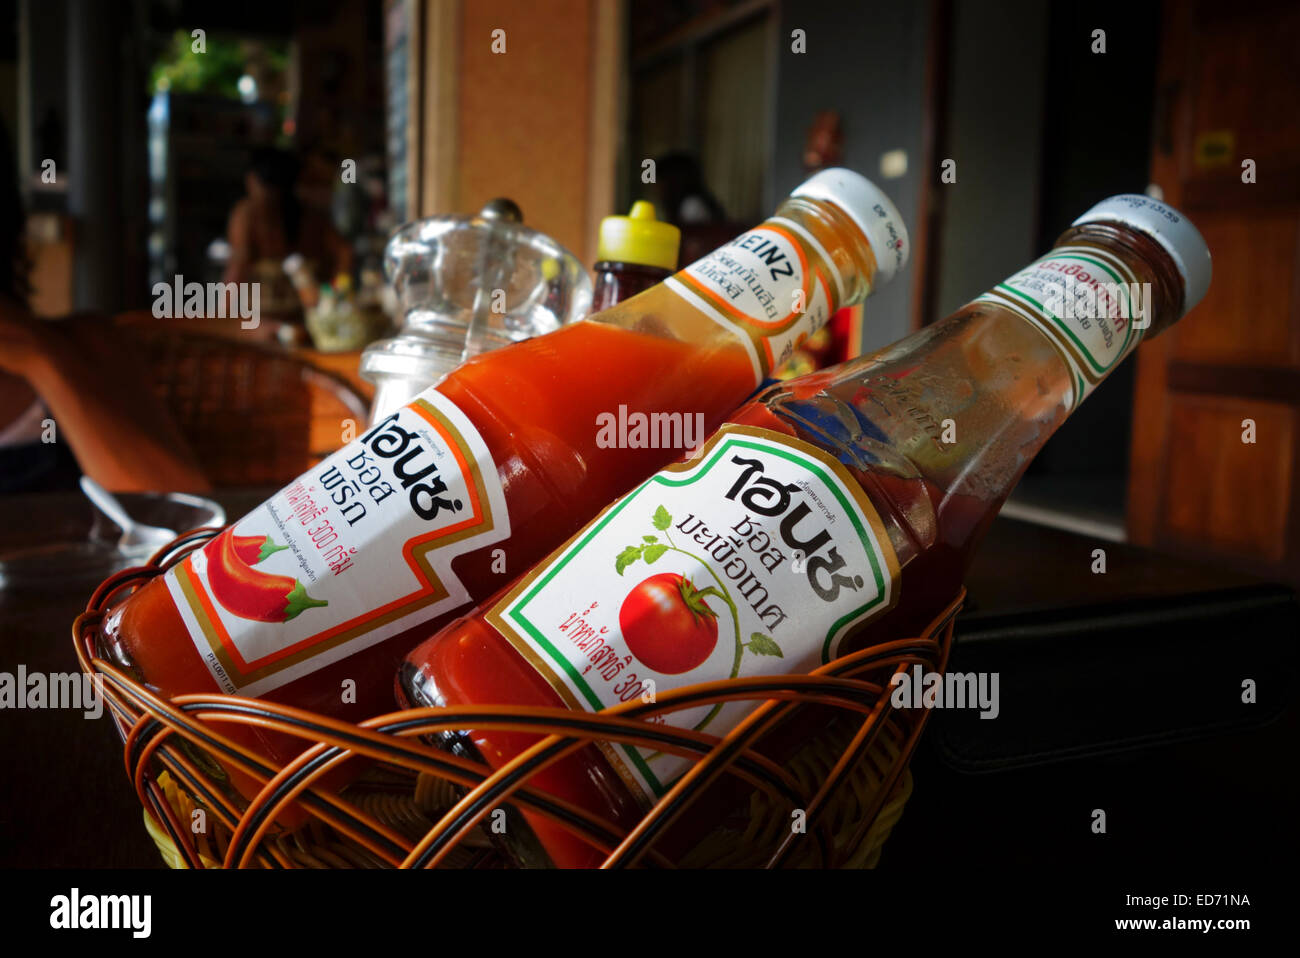 Heinz Tomato Ketchup and chili sauce in basket. Thai language. Thailand. South-east Asia. Stock Photo